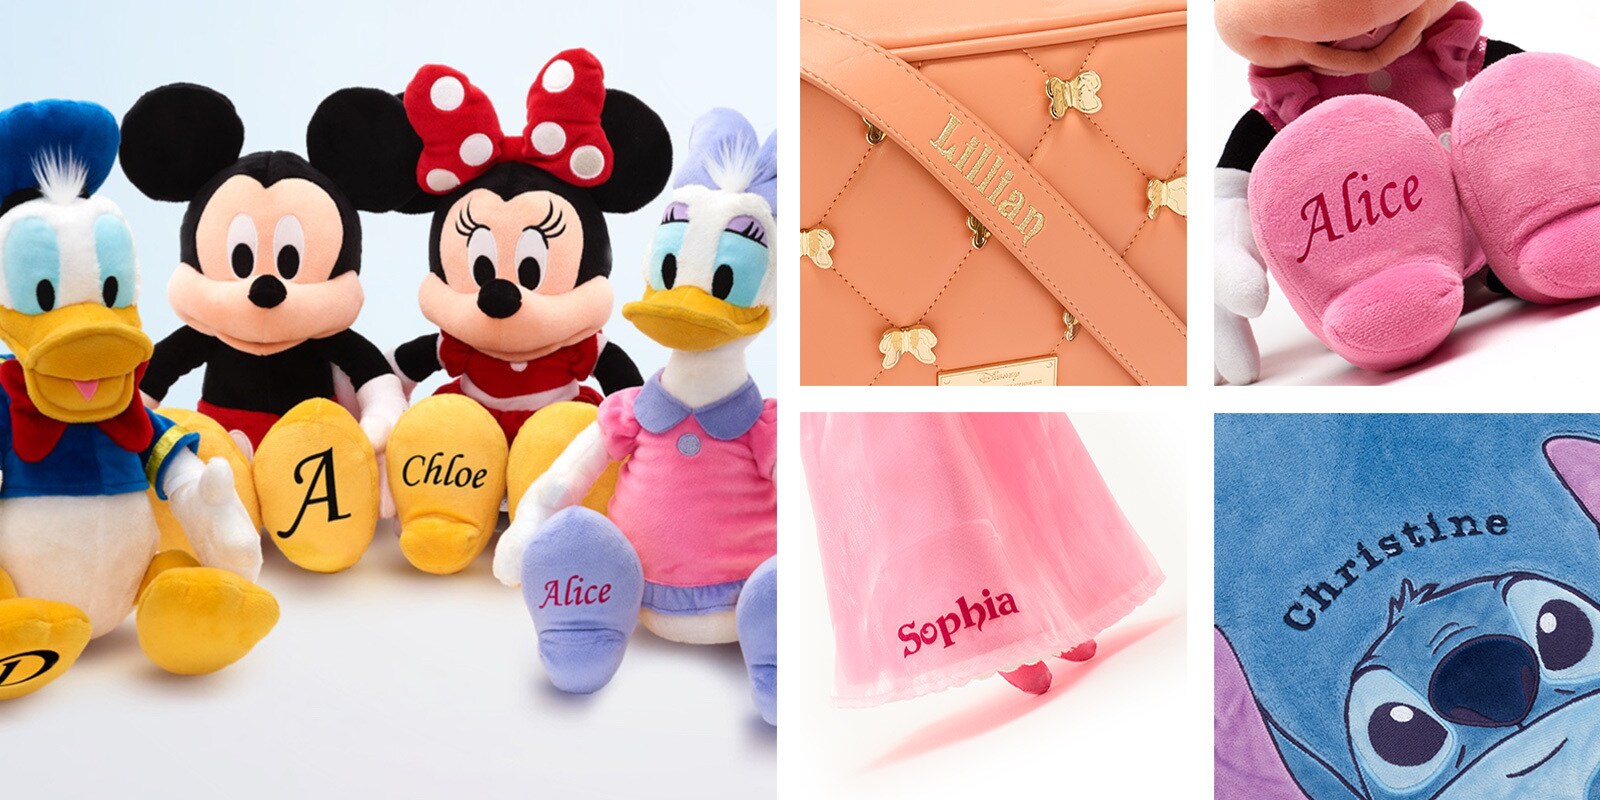 A selection of products with personalised names from shopDisney